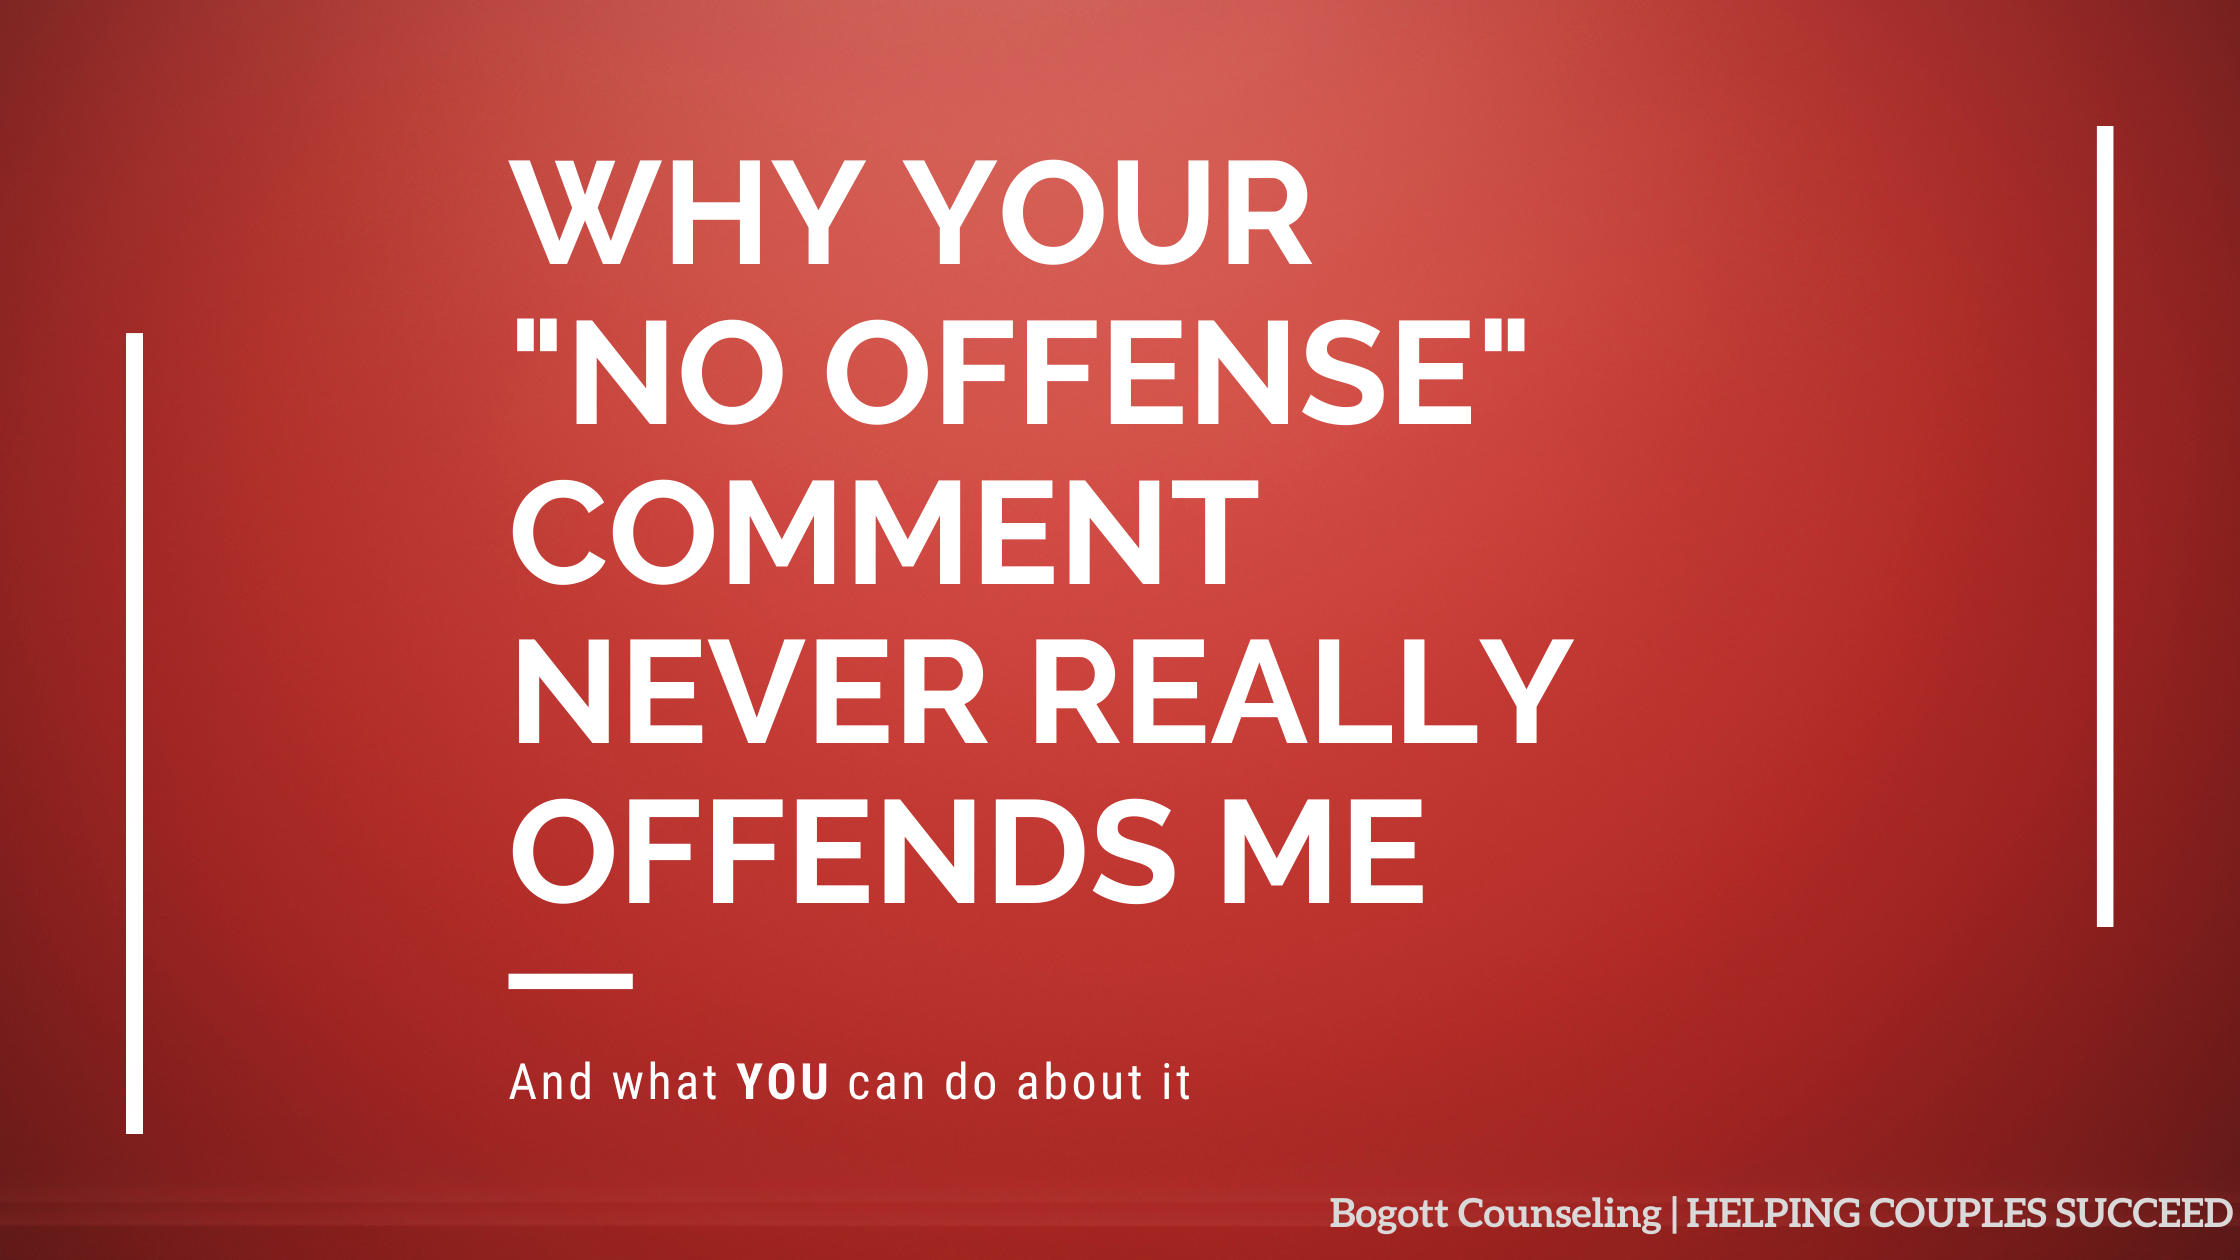 Your "No Offense" Comment